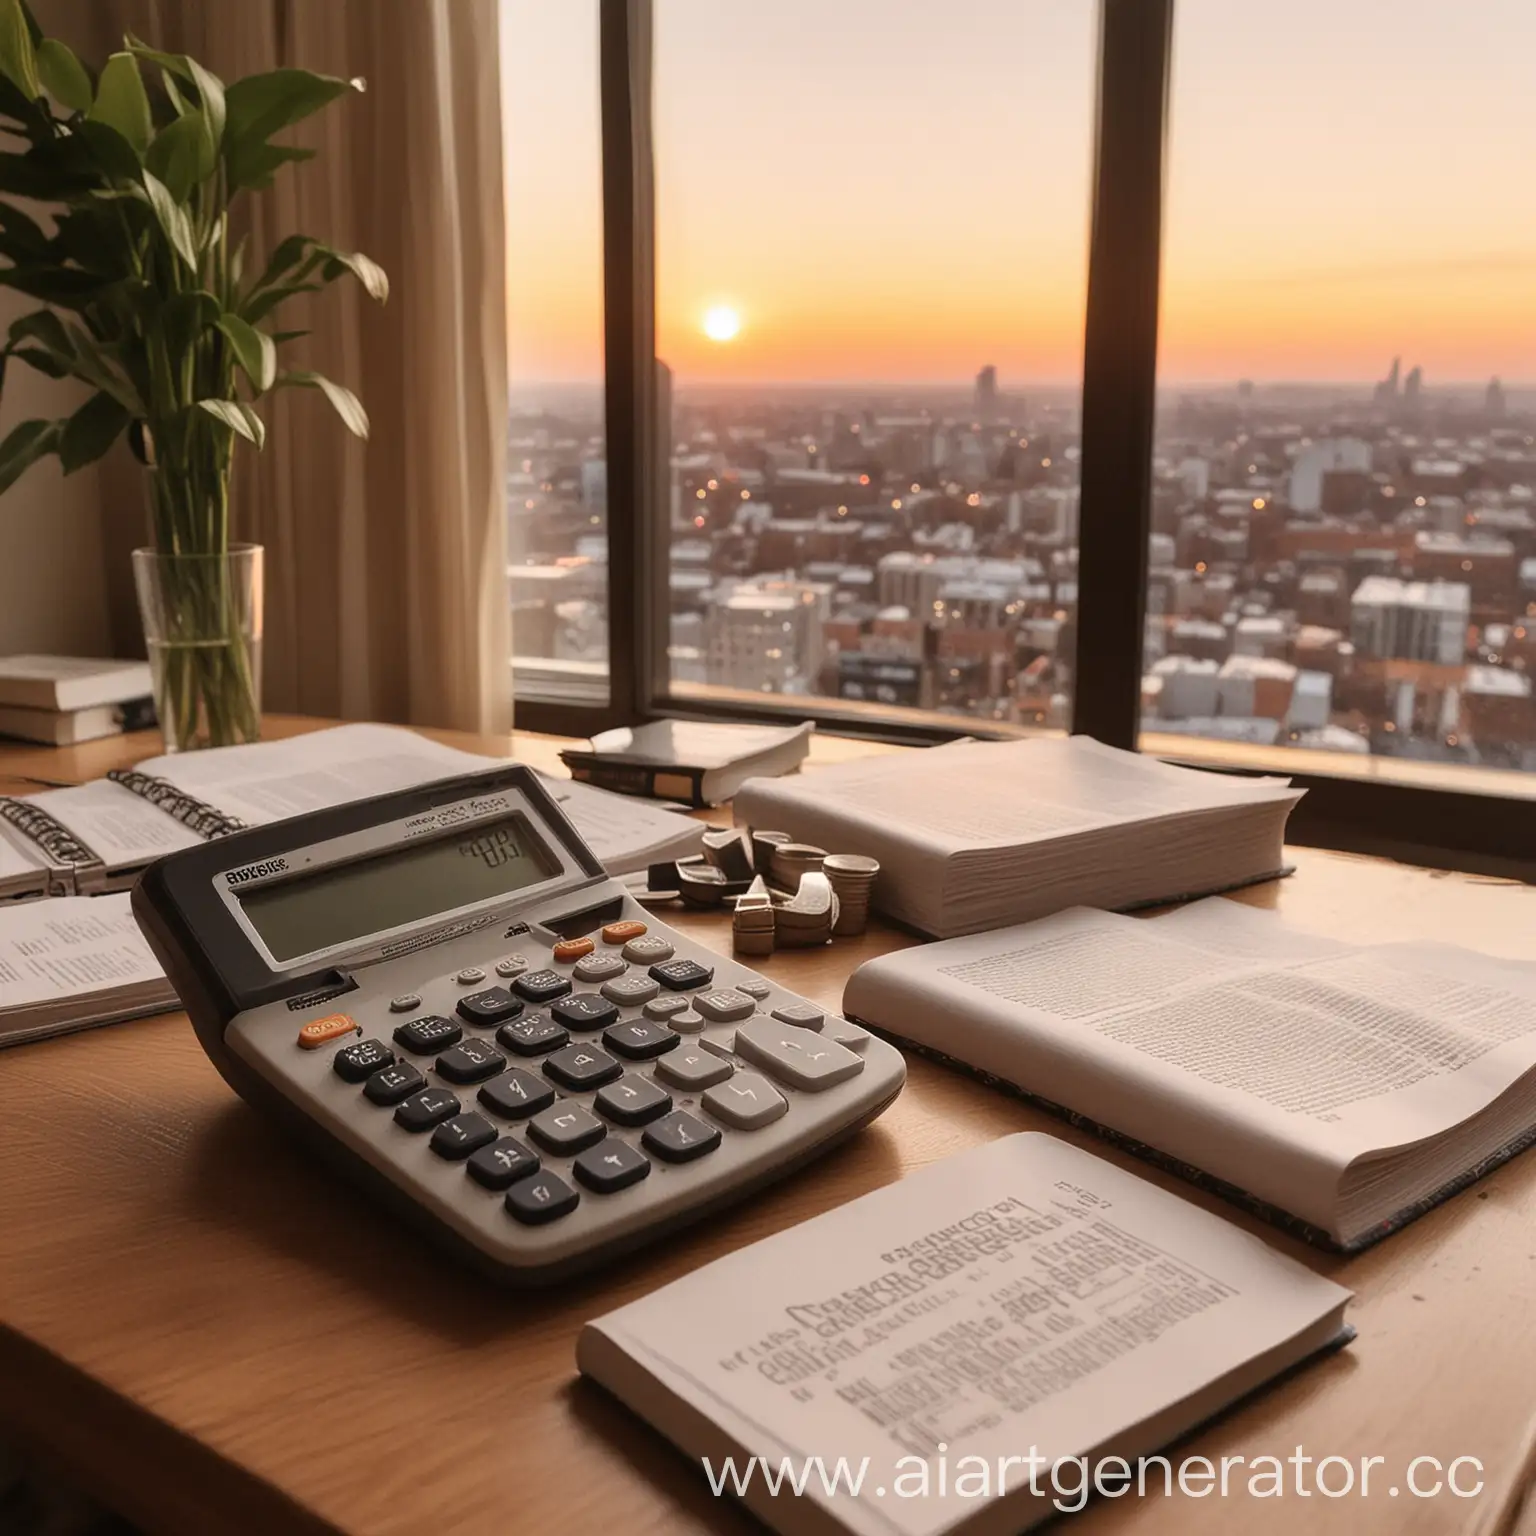 Economics-and-Finance-Reports-Calculation-in-Sunset-Setting